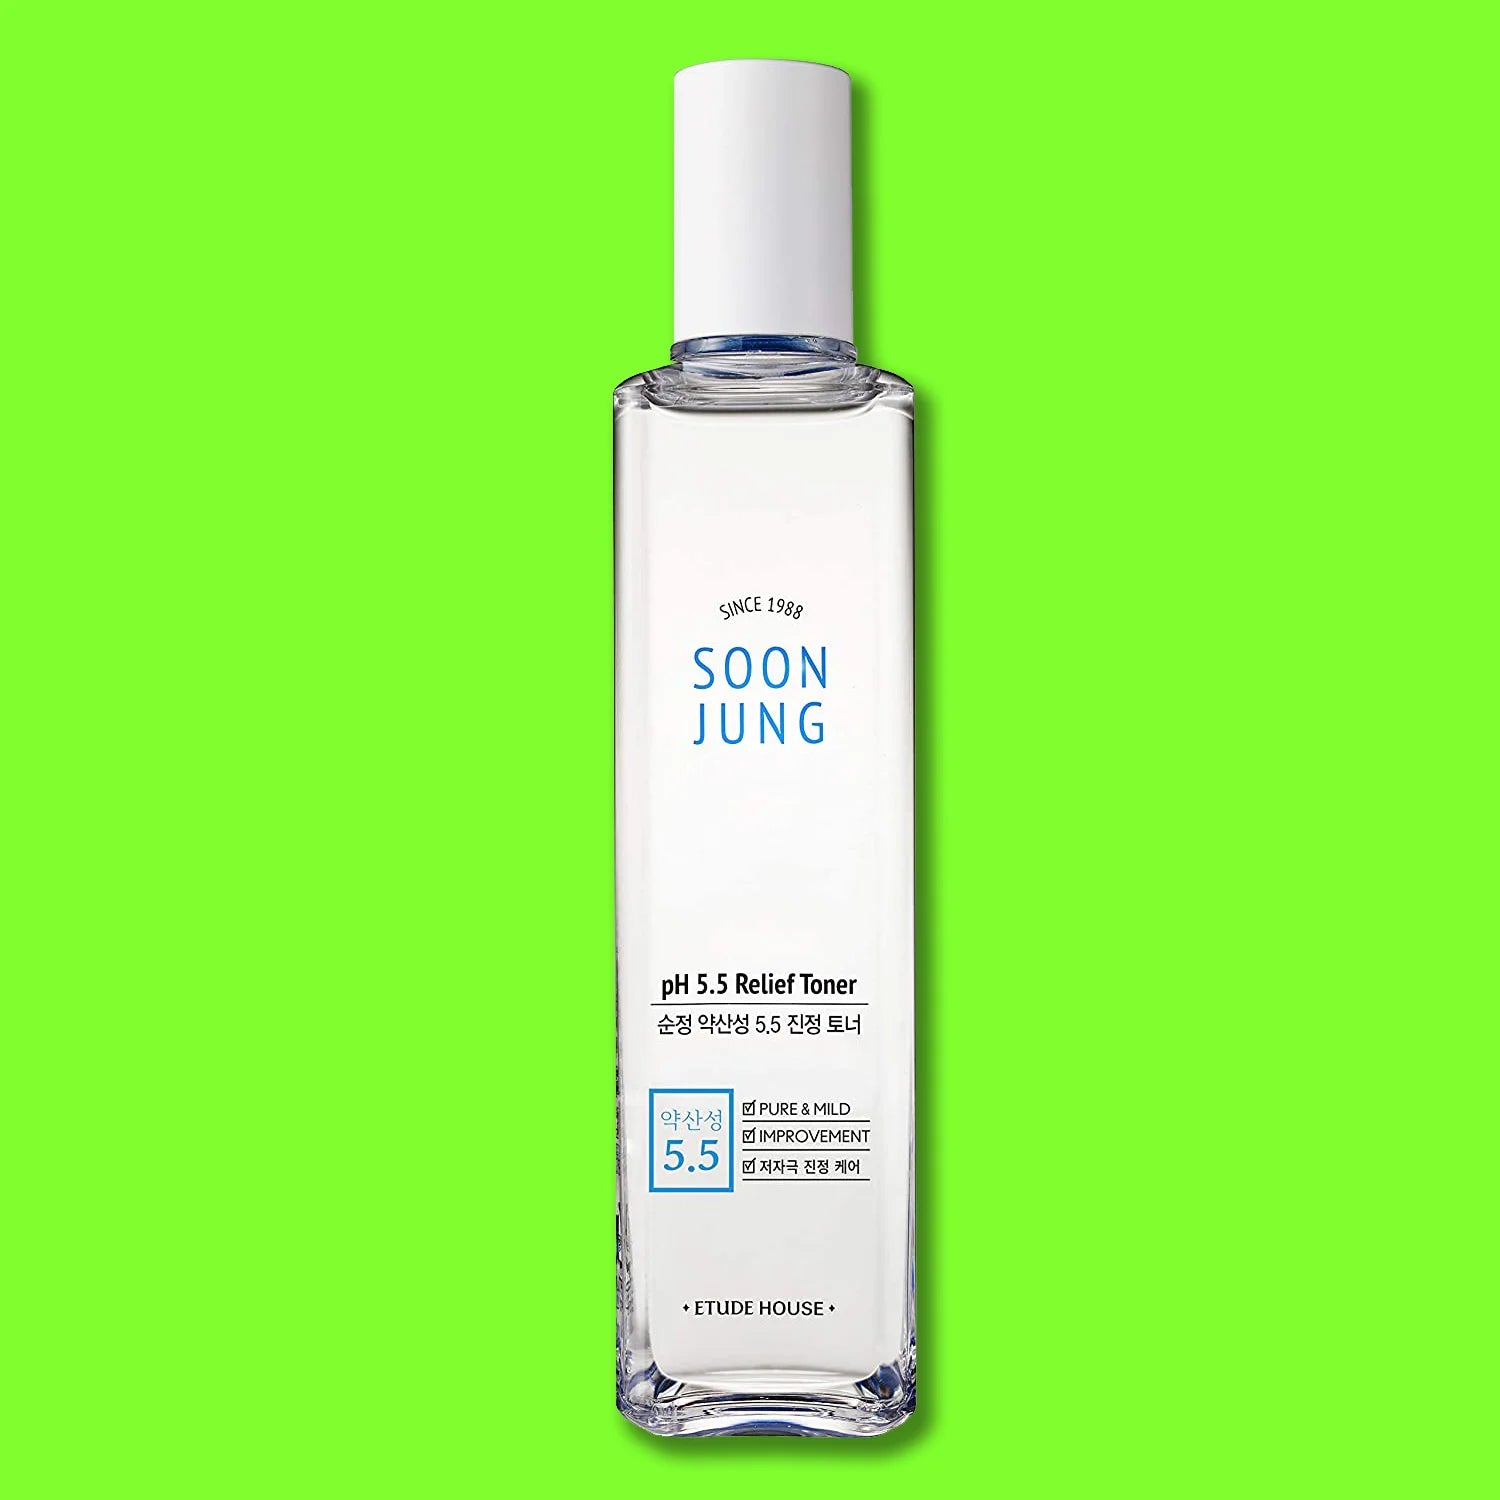 Etude House SoonJ ung PH 5.5 Relief Toner good hydrating skincare products from South Korea Asia Japan actress k-drama makeup k beauty world